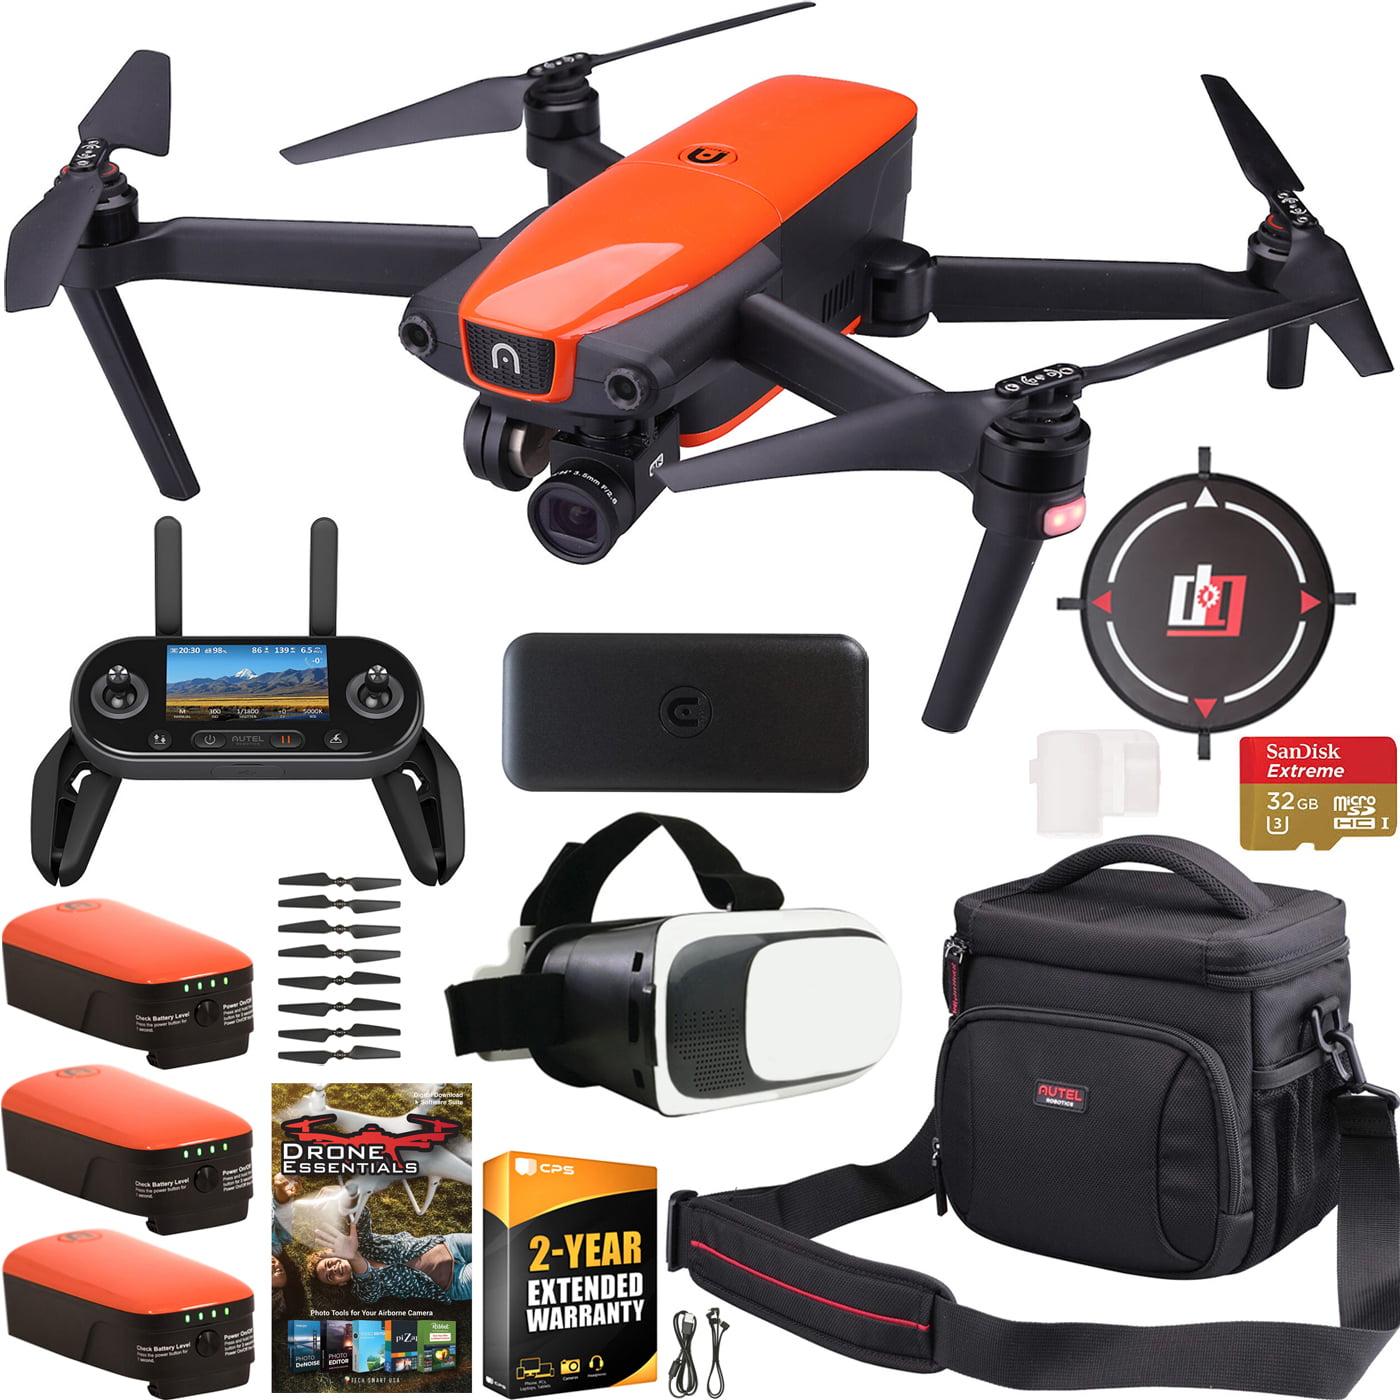 Triple Battery Kit Hard Case Autel Robotics EVO Drone Quadcopter Rugged Extended Warranty Bundle 4K Ultra HD Video 3-Axis Gimbal 12MP Photo Camera with OLED Remote Control FPV VR Goggle Headset